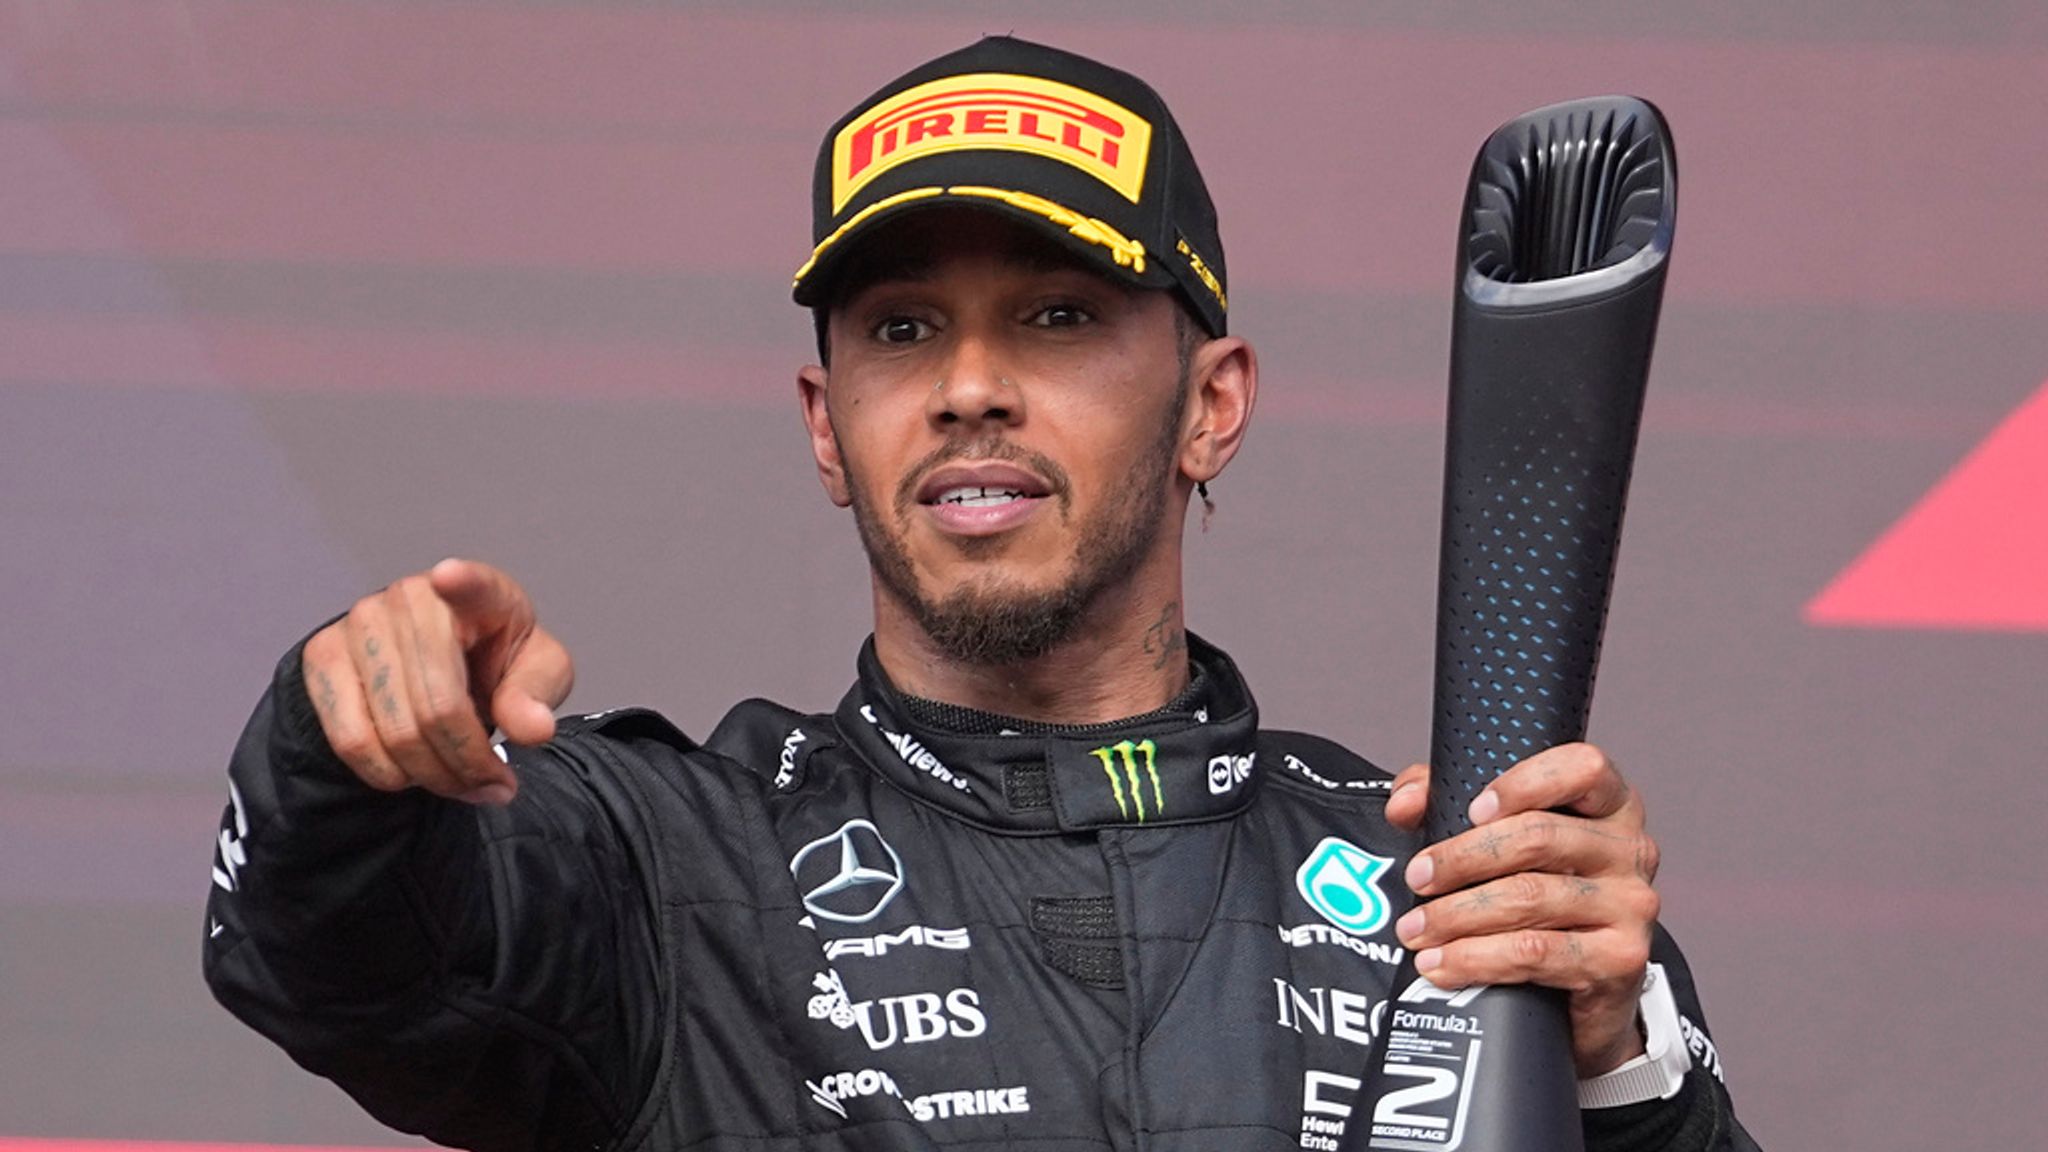 Lewis Hamilton disqualified from US Grand Prix after second-place finish, UK News